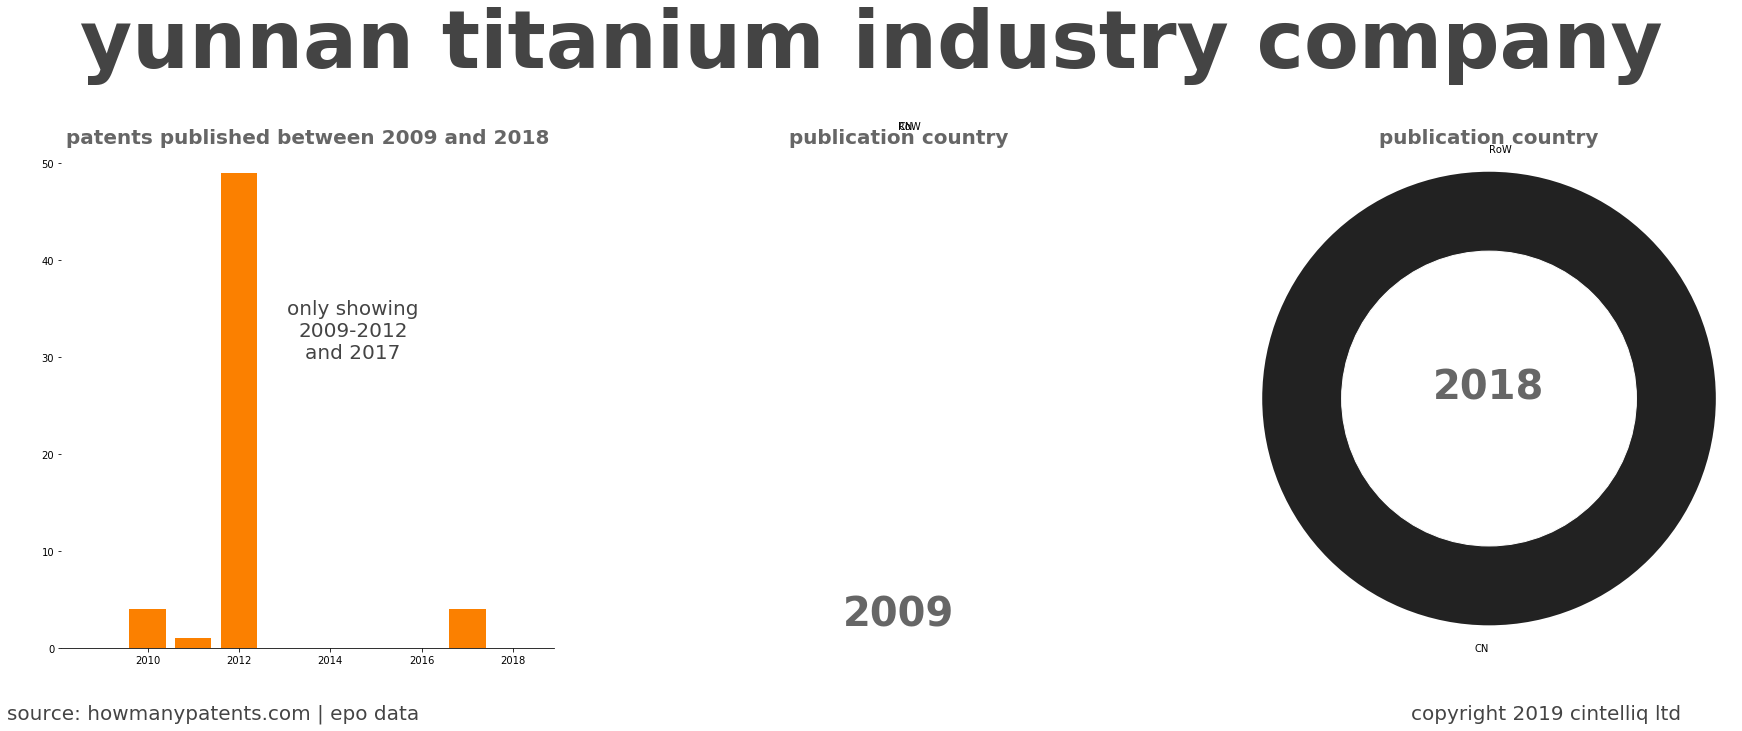 summary of patents for Yunnan Titanium Industry Company